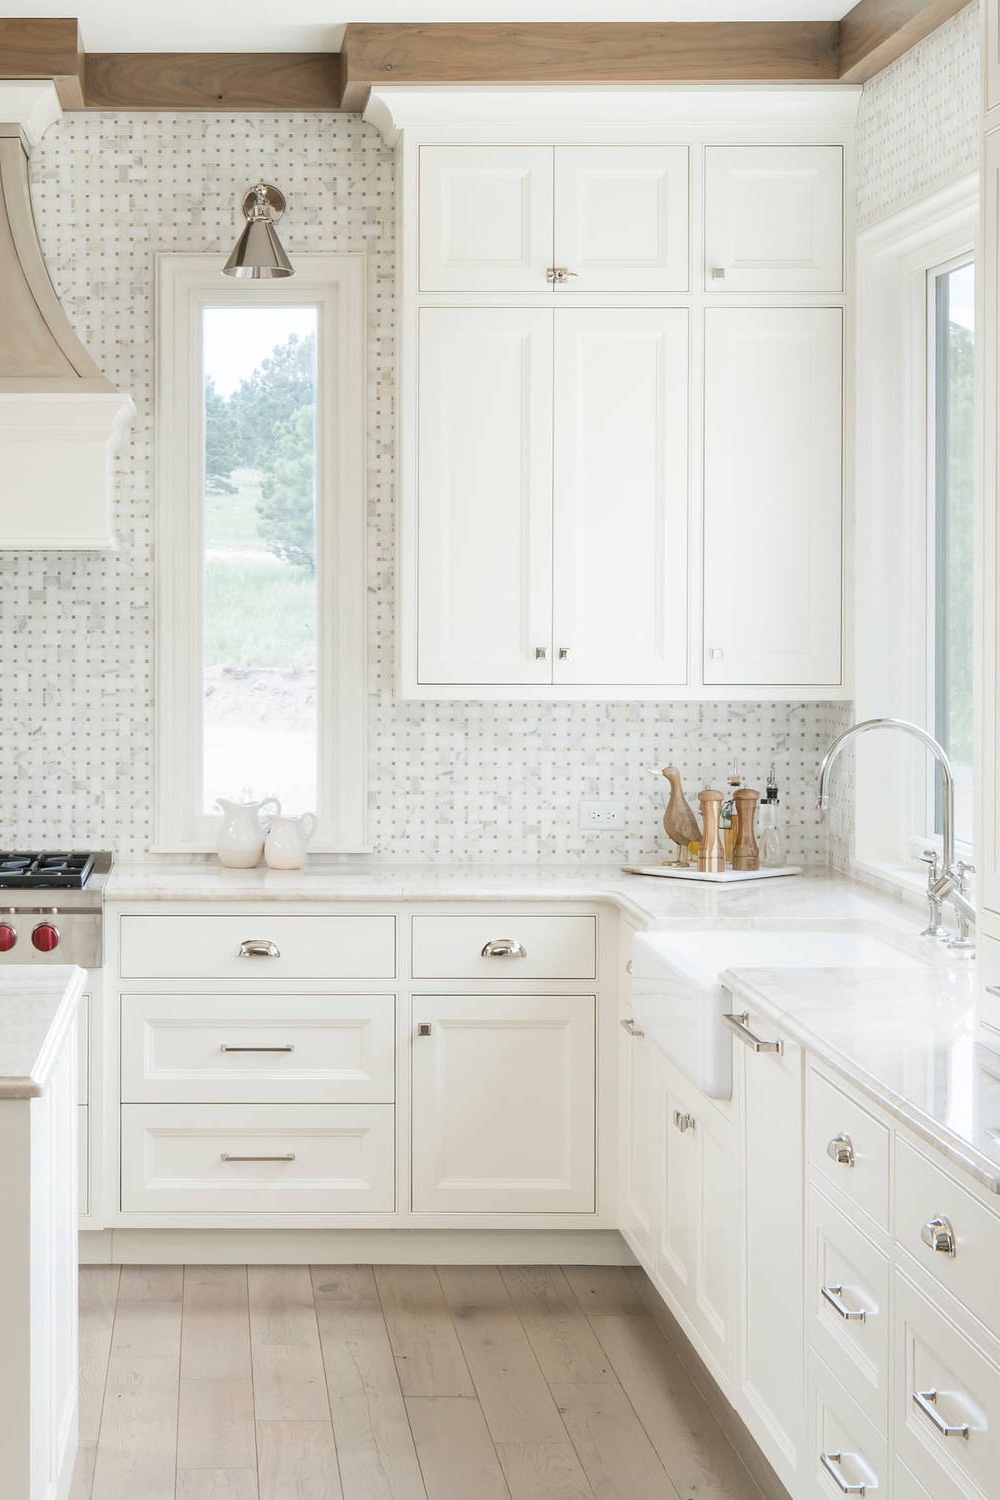 Antique White Shaker Cabinets Style Paint Space Clean Lines Hardware Versatile Neutral Remodel